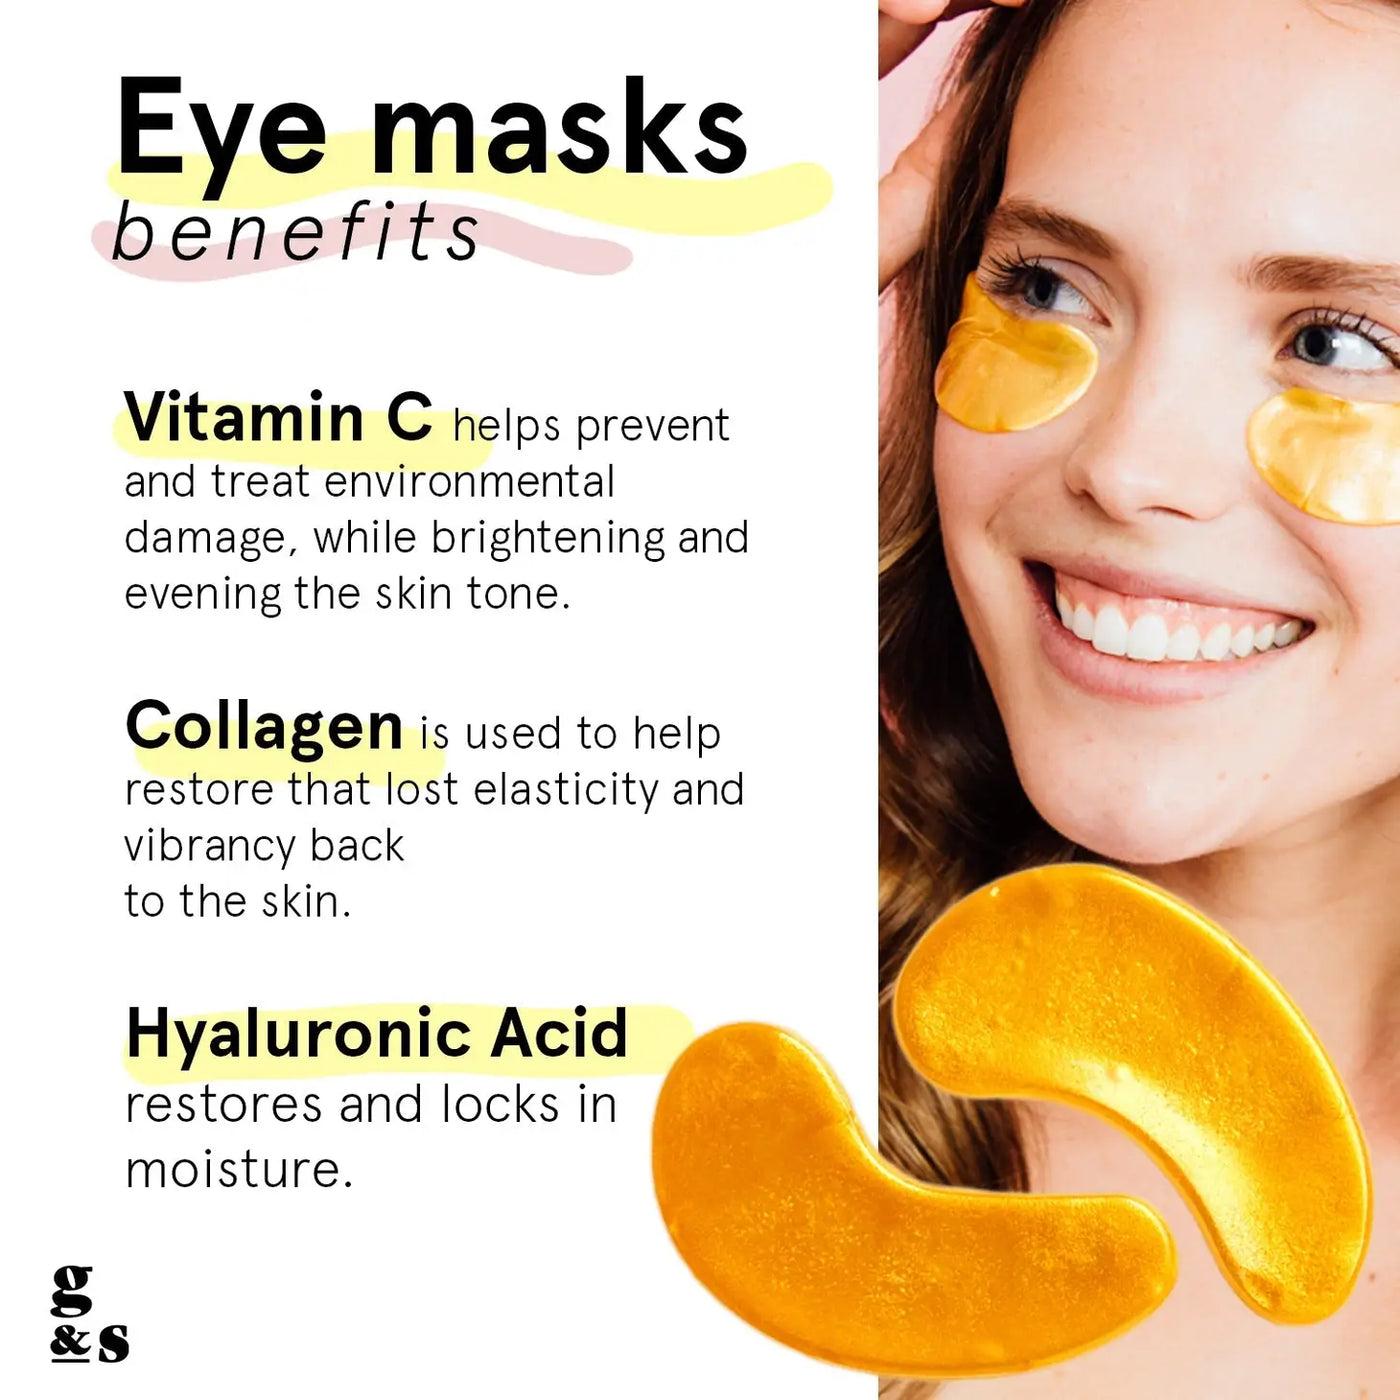 The benefits list of an energy drink eye mask 